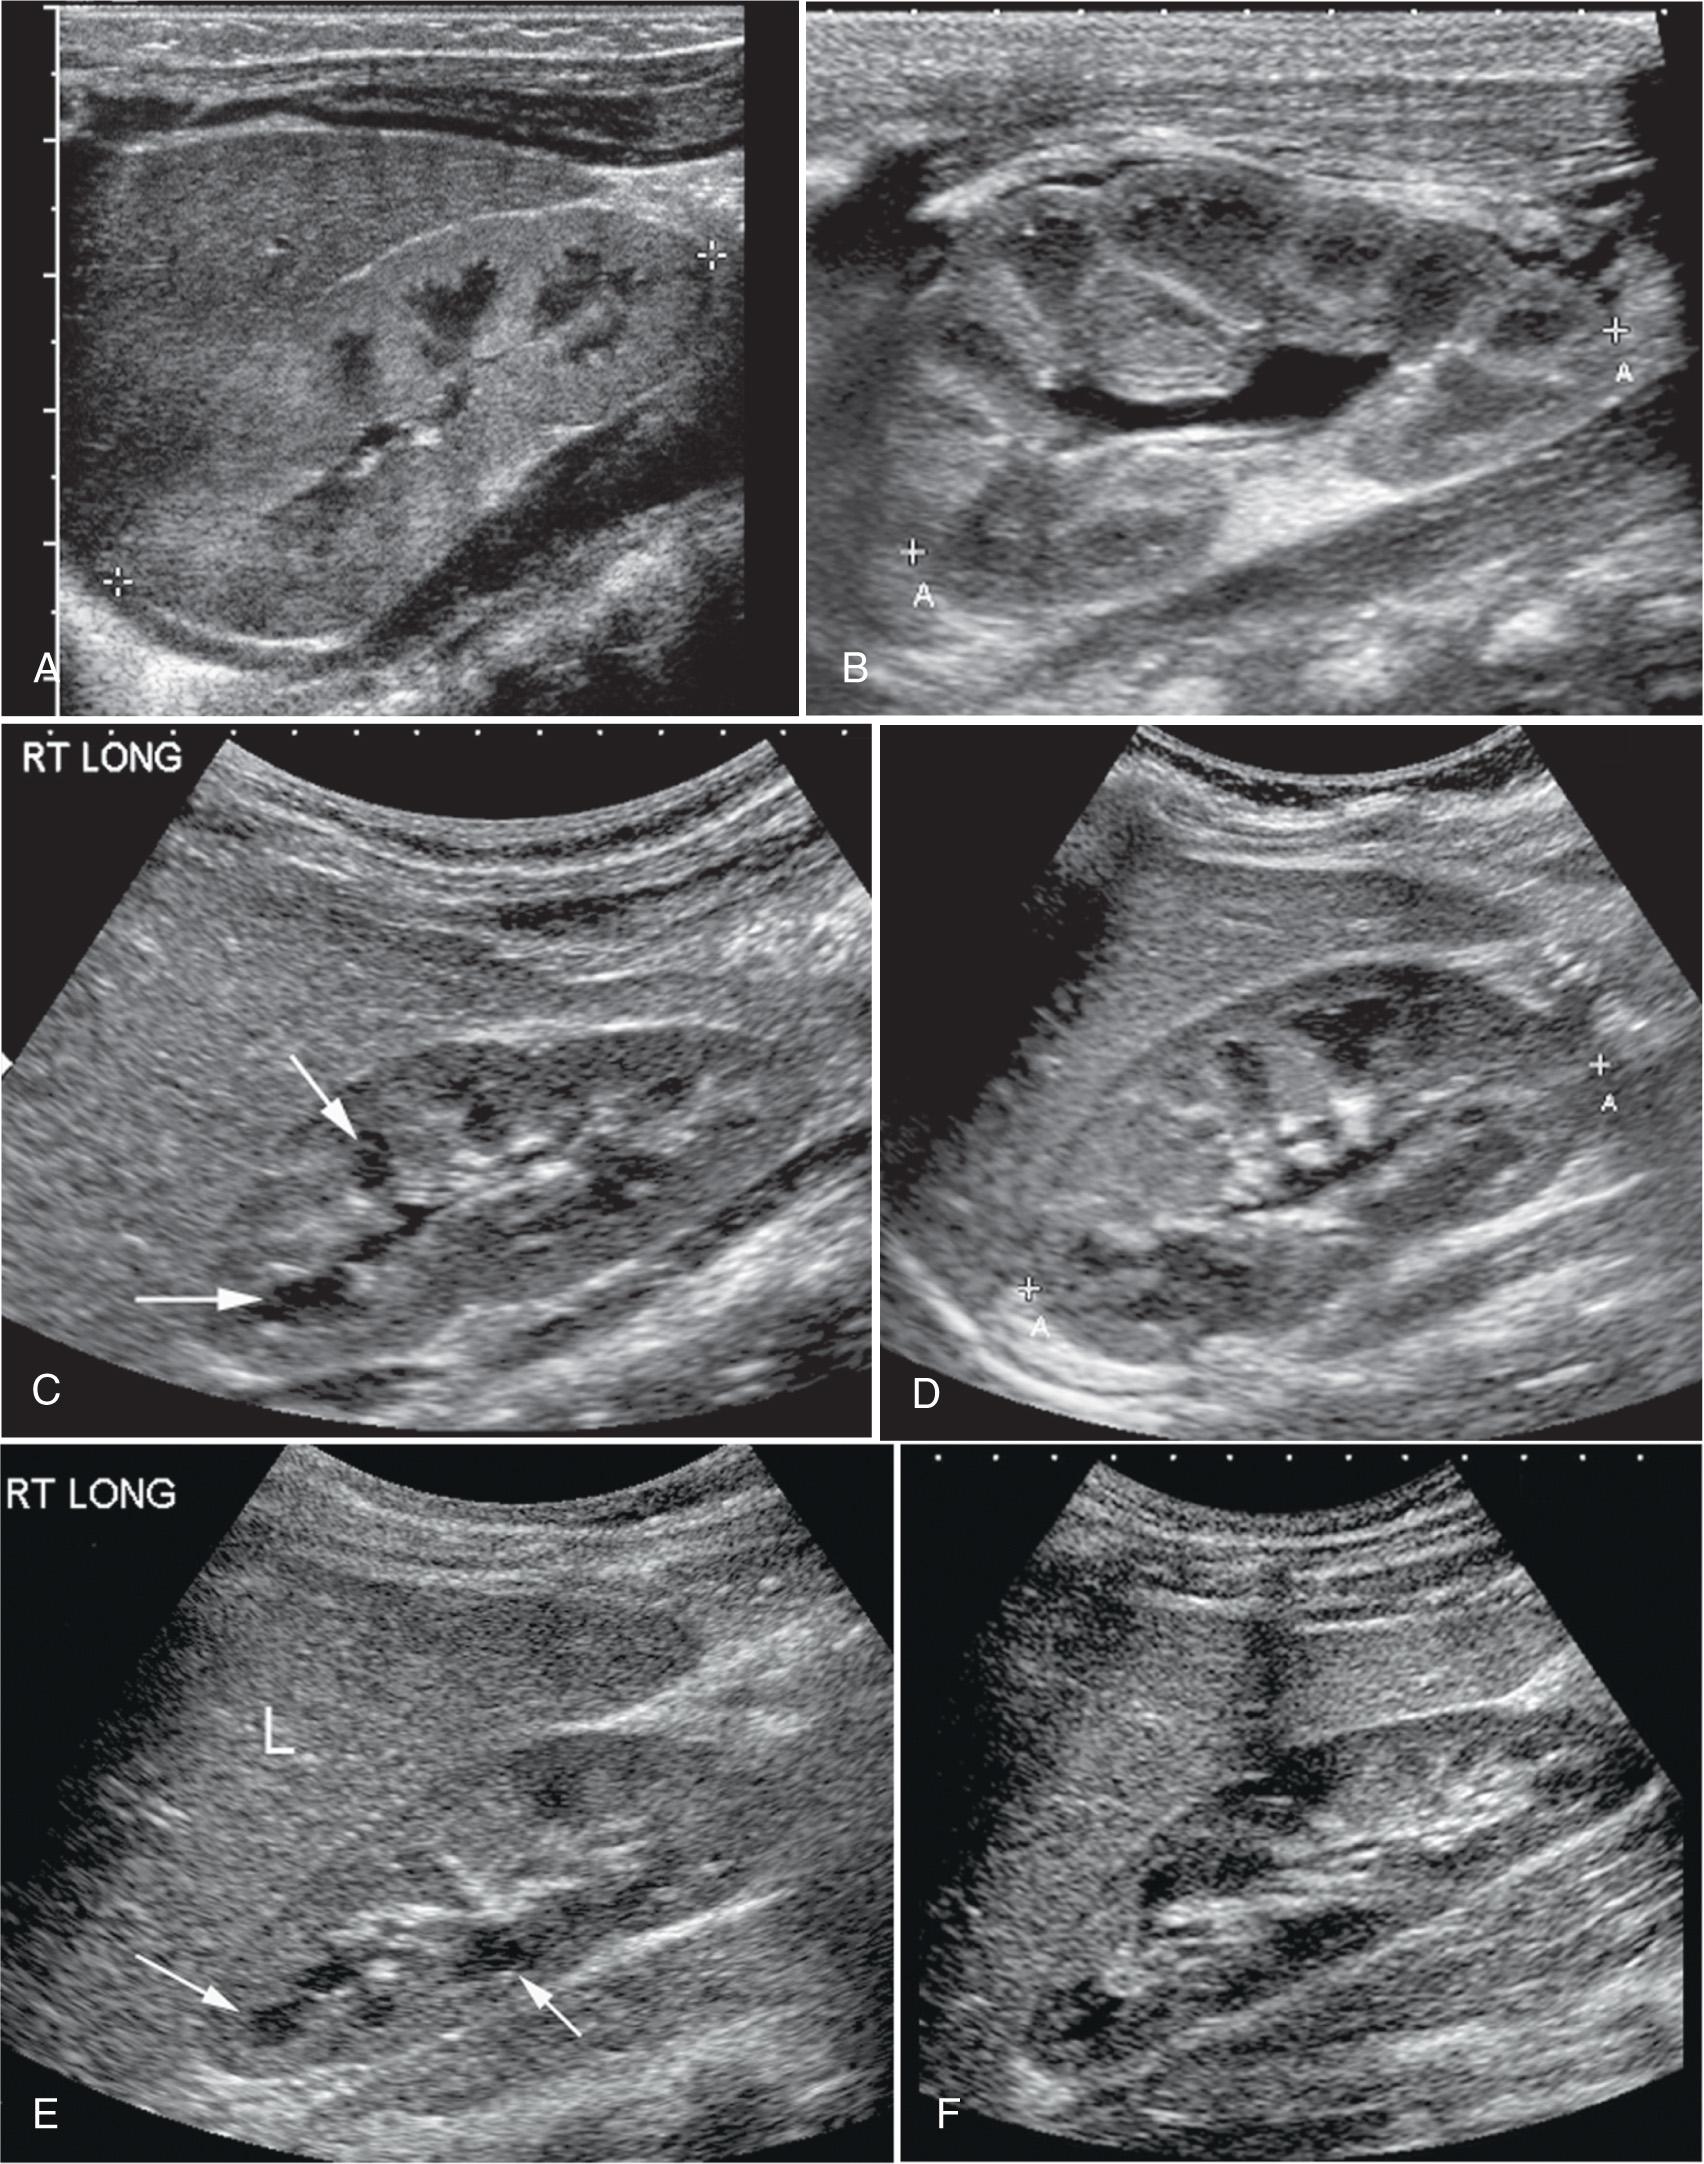 FIG. 52.8, Normal Renal Appearances at Different Ages.